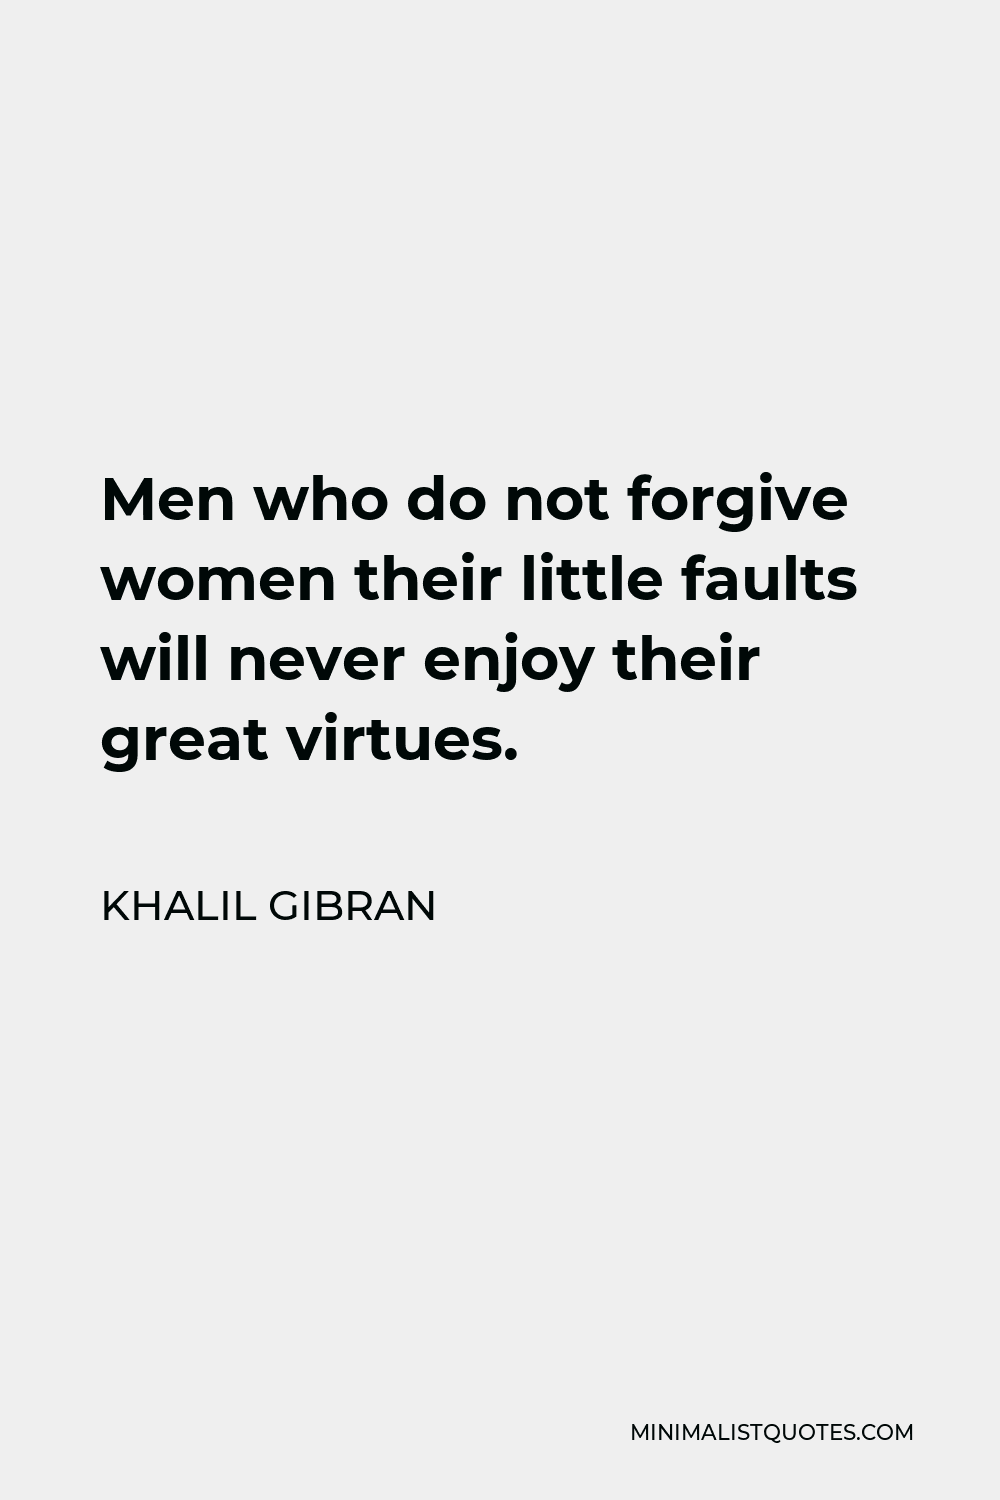 Khalil Gibran Quote - Men who do not forgive women their little faults will never enjoy their great virtues.